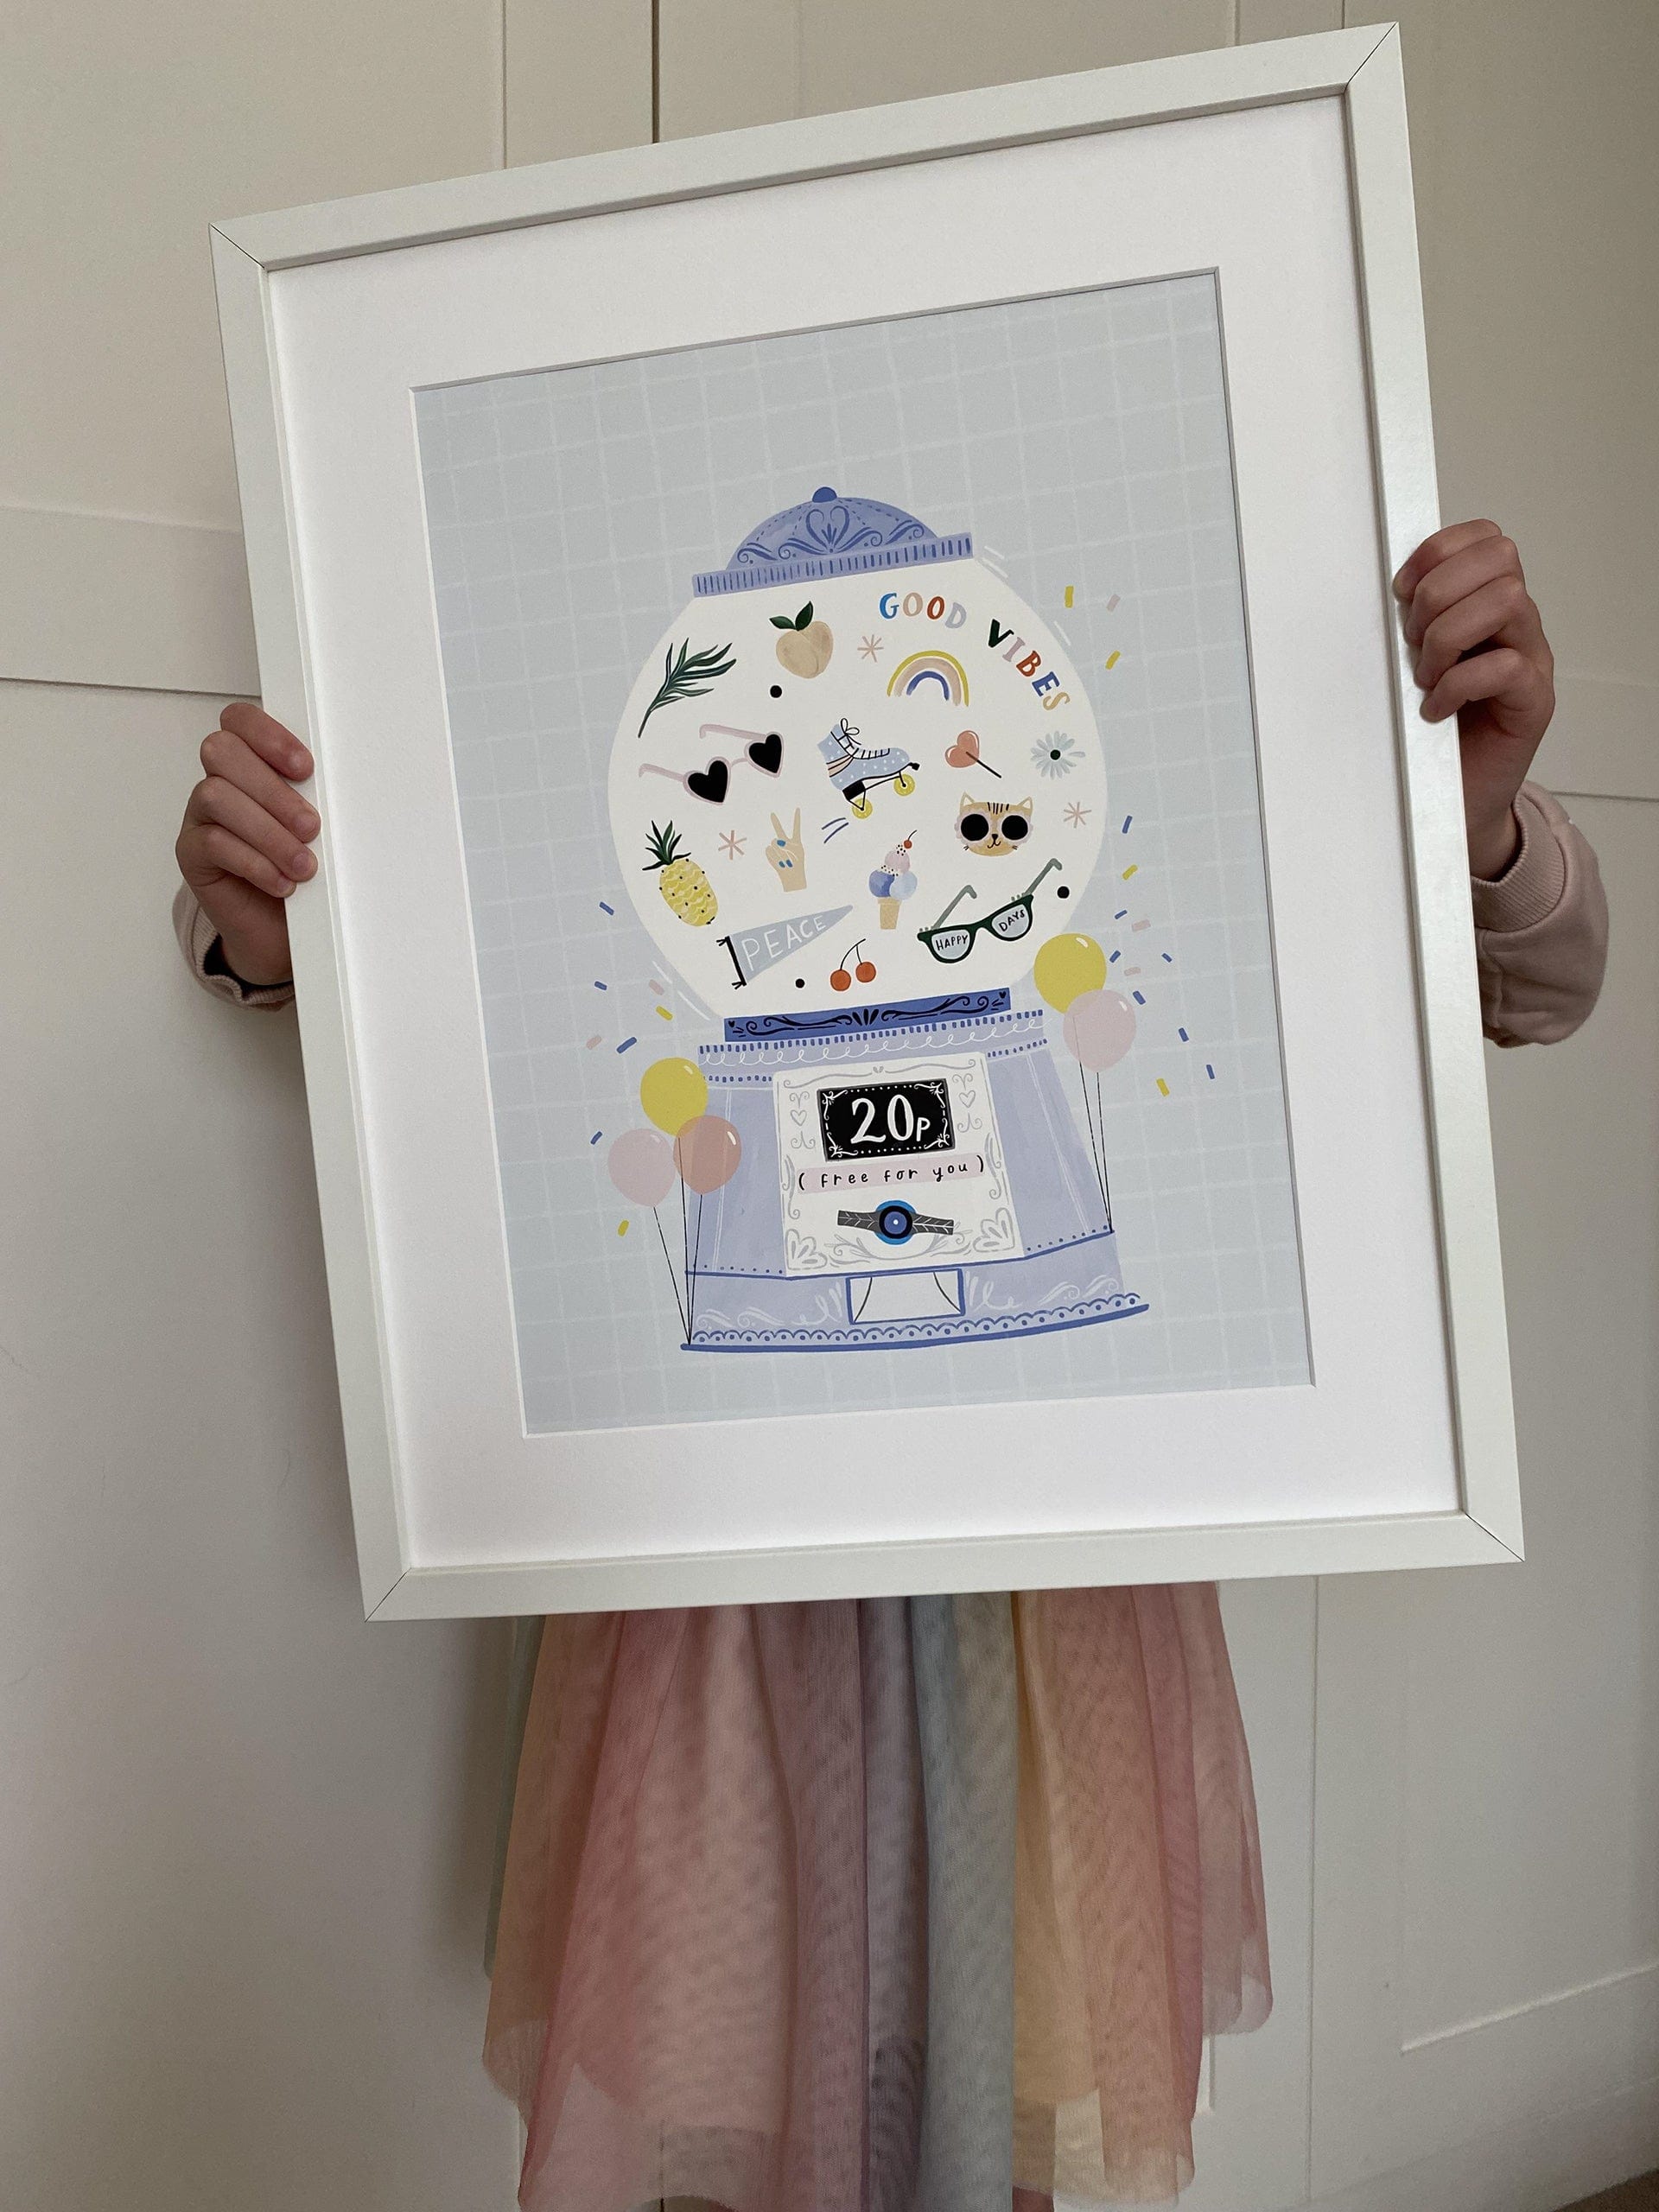 Child in a muted rainbow coloured skirt, holding up a mounted art print in a white frame. Our Good Vibes Gumball Art Print shows a vintage style gumball machine with balloons on either side on a blue background with white line check design. Inside the glass ball of the gumball machine are the words good vibes, sunglasses, roller skates, a cat in sunglasses, ice cream, a rainbow and more.